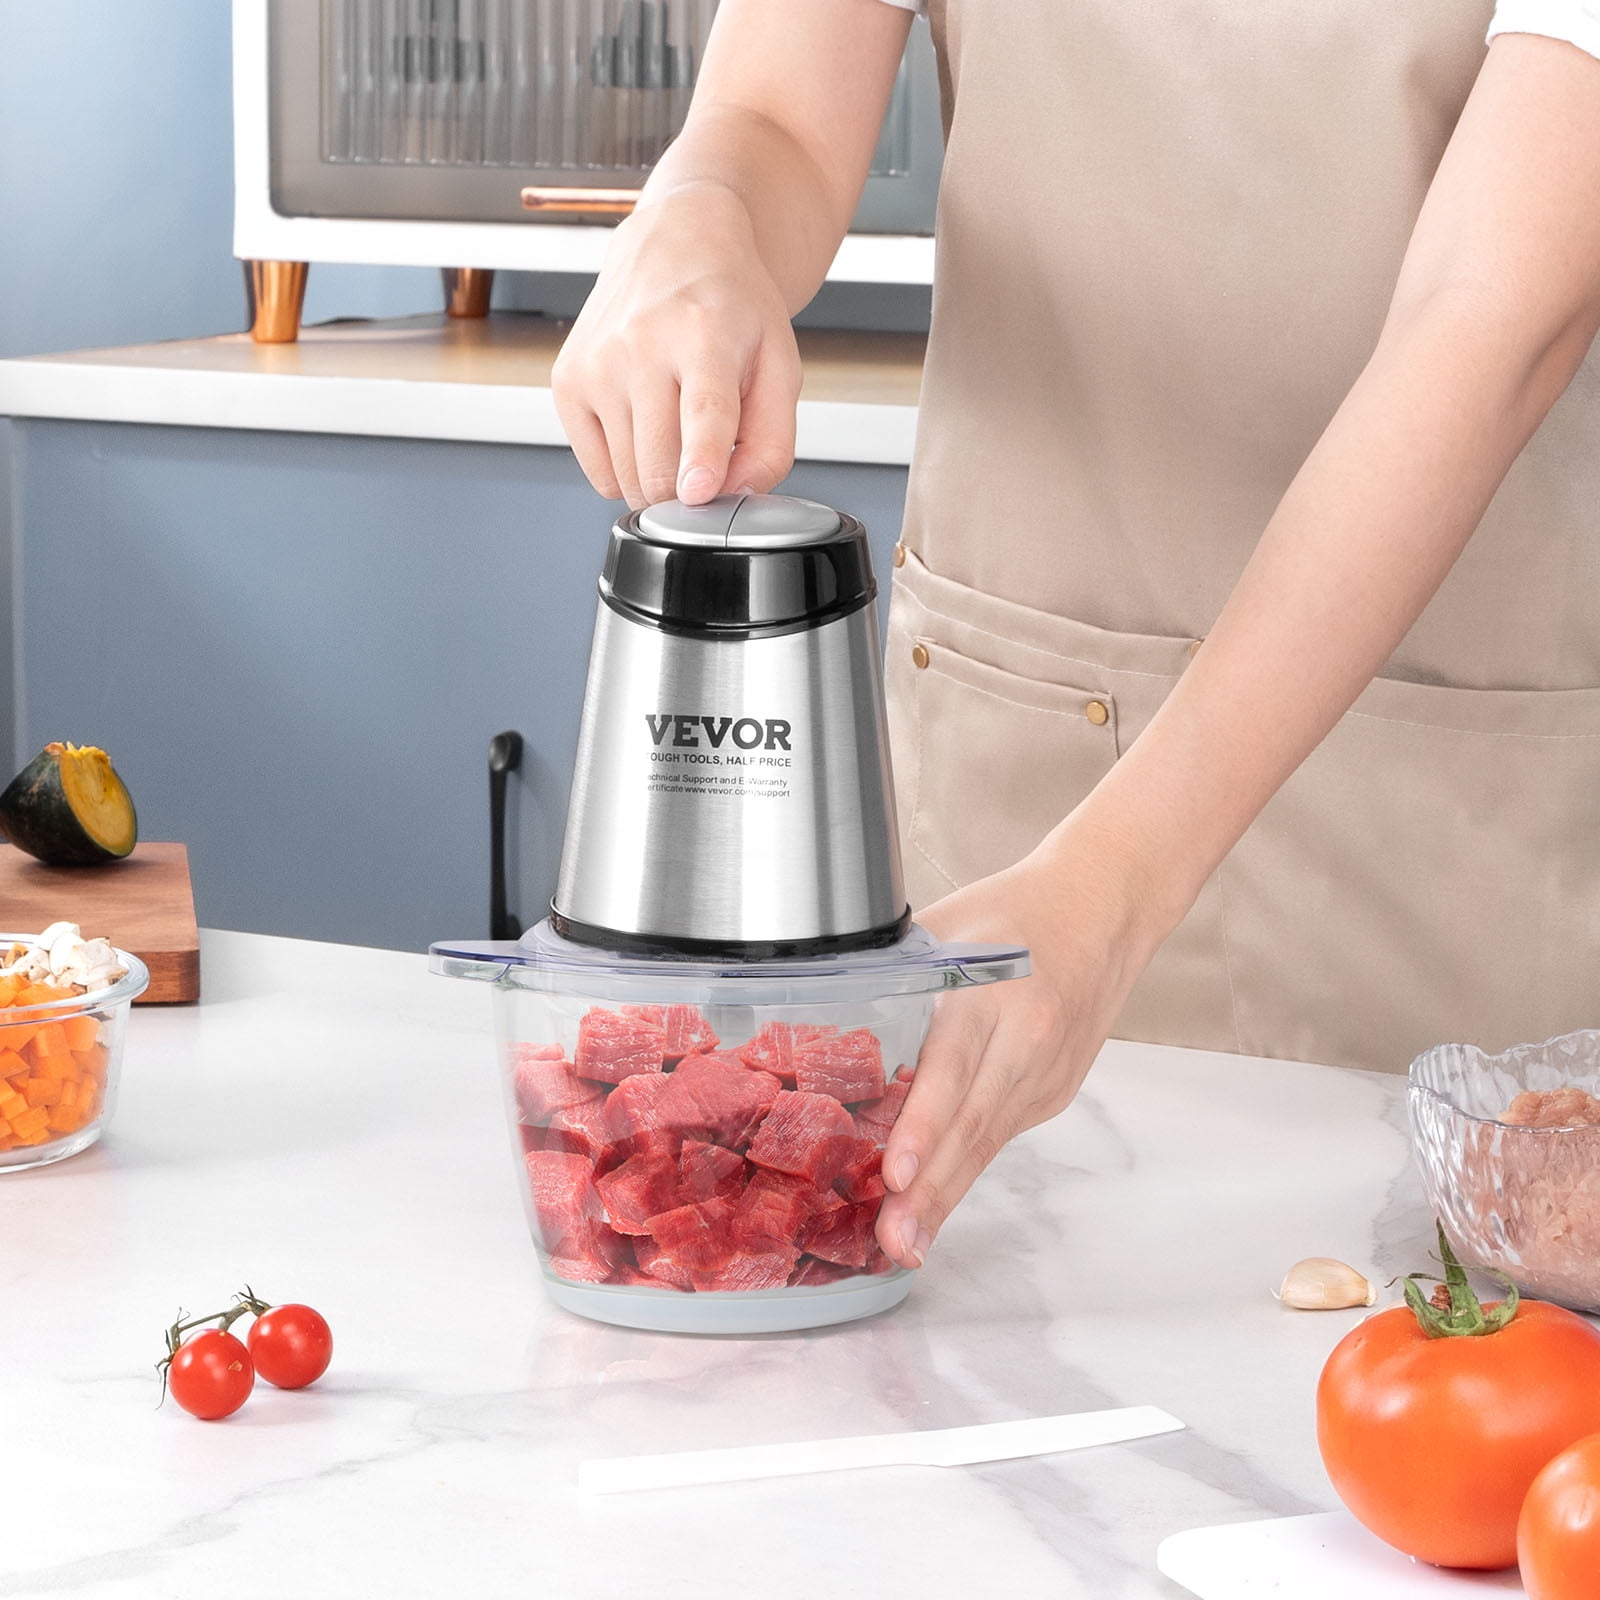 VEVOR Food Processor, Electric Meat Grinder with 4-Wing Stainless Steel Blades, 8 Cup+5 Cup Two Bowls, 400W Electric Food Chopper, 2 Speeds Food